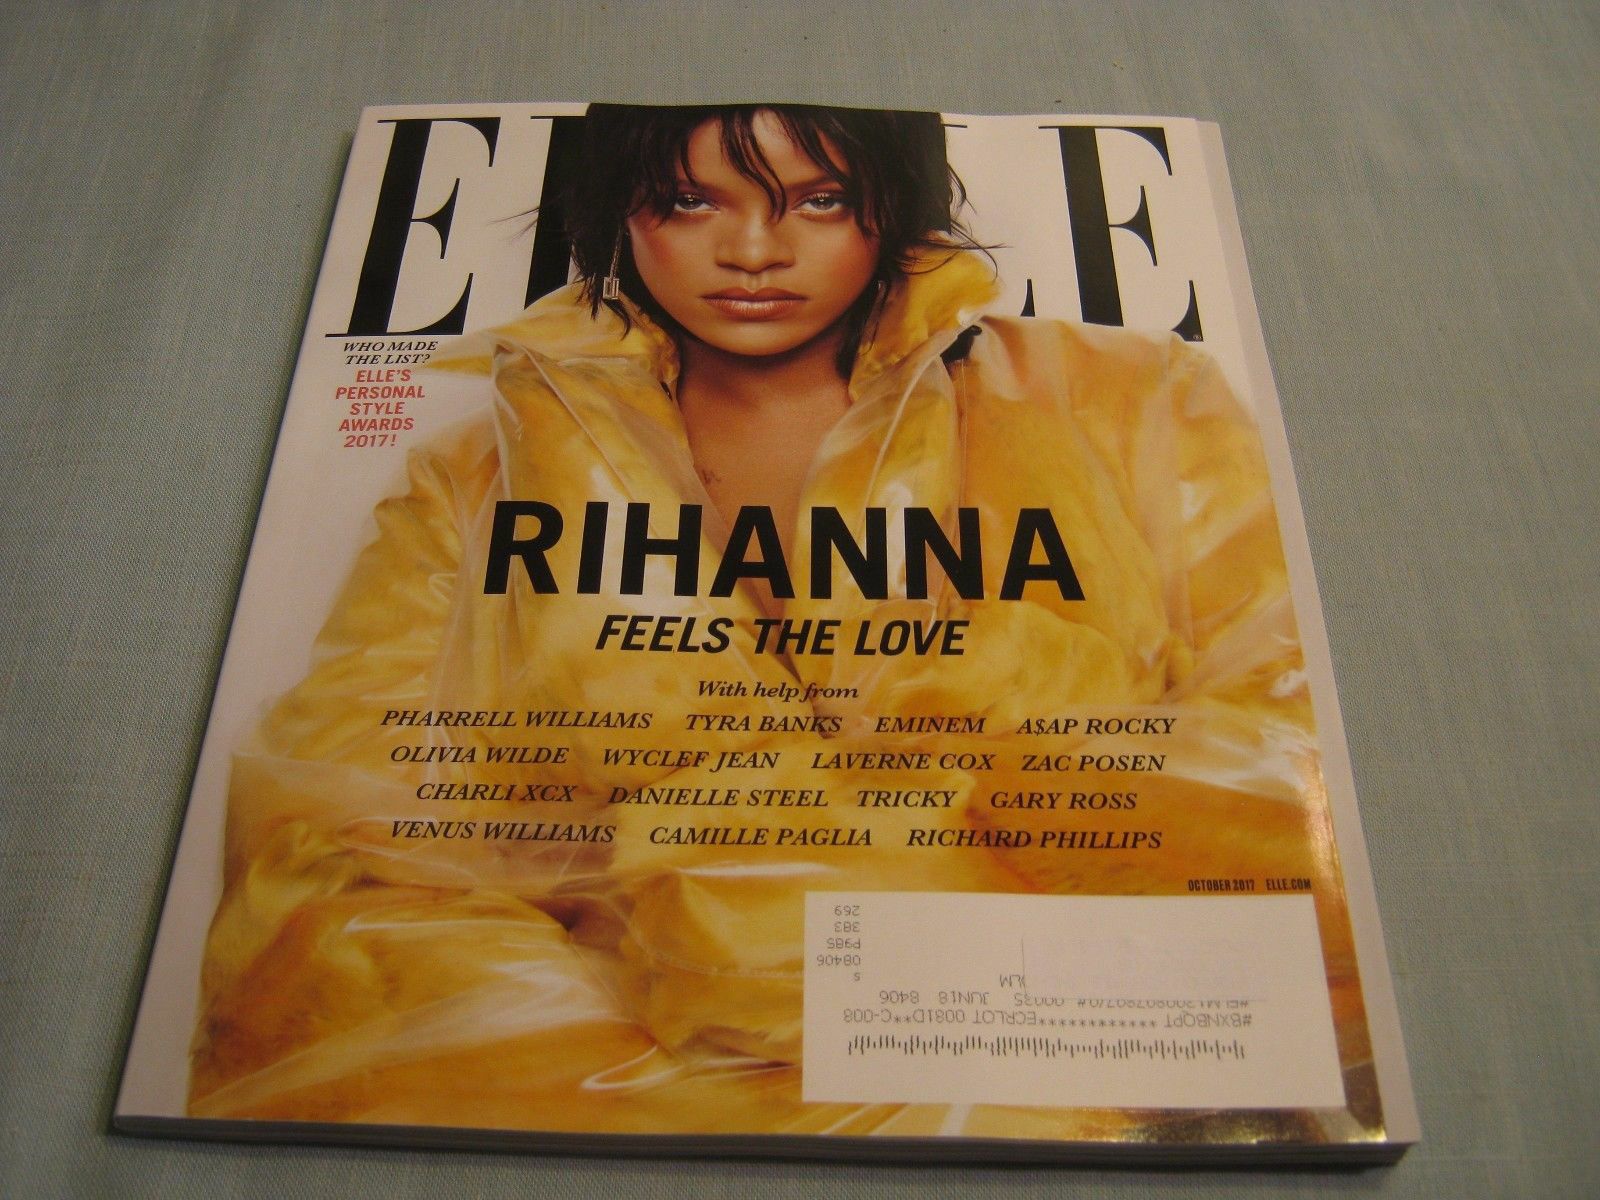 ELLE MAGAZINE October 2017 RIHANNA FEELS THE LOVE Elle's Personal Style Awards..never read...